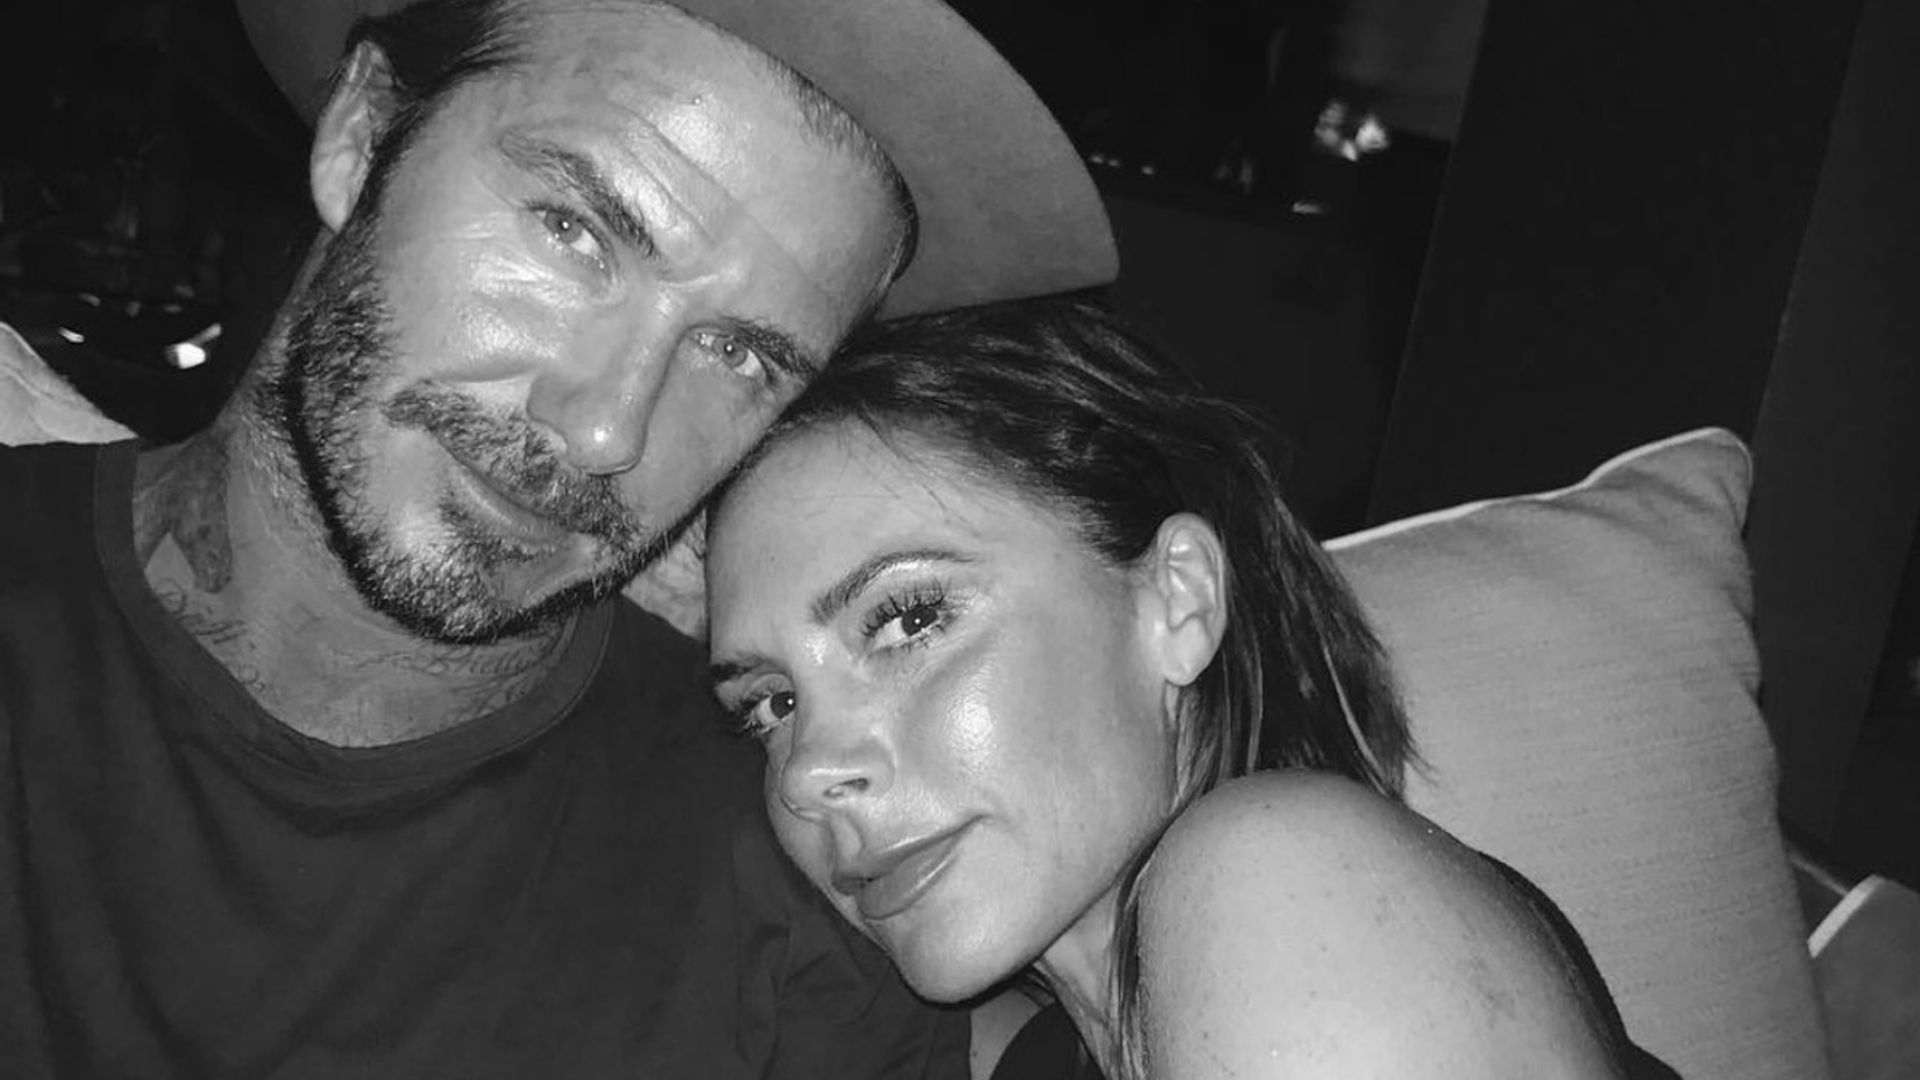 Victoria Beckham delights fans with photo of rarely-seen family member